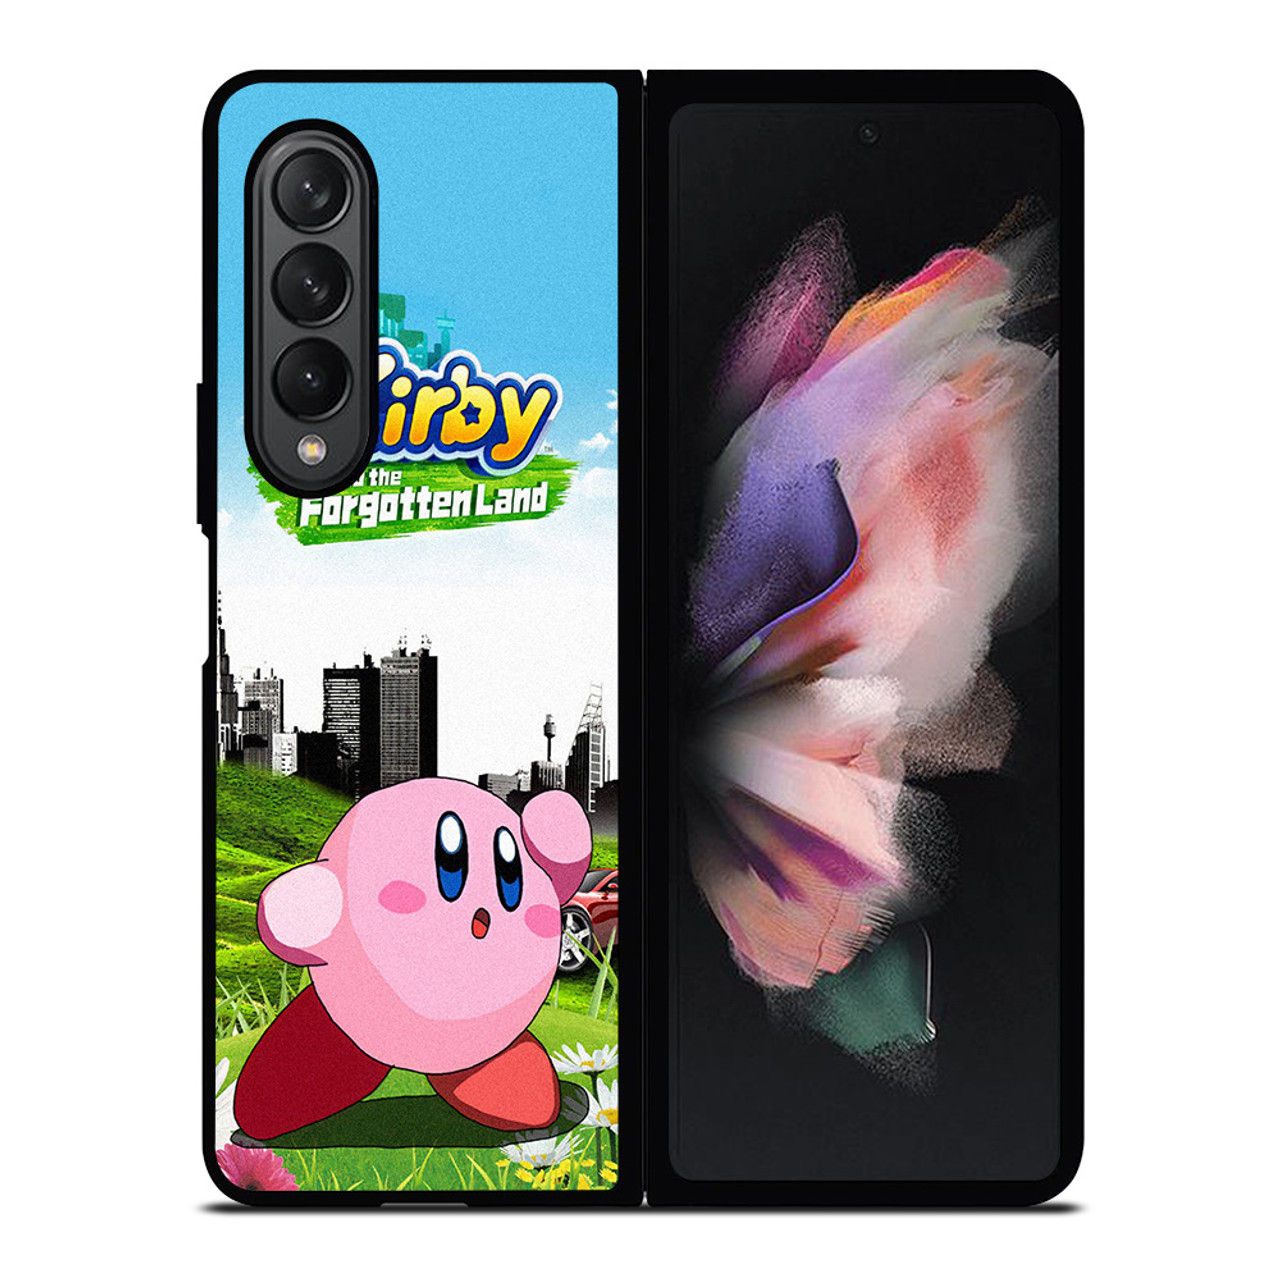 KIRBY AND THE FORGOTTEN LAND GAMES Samsung Galaxy Z Fold 3 Case Cover